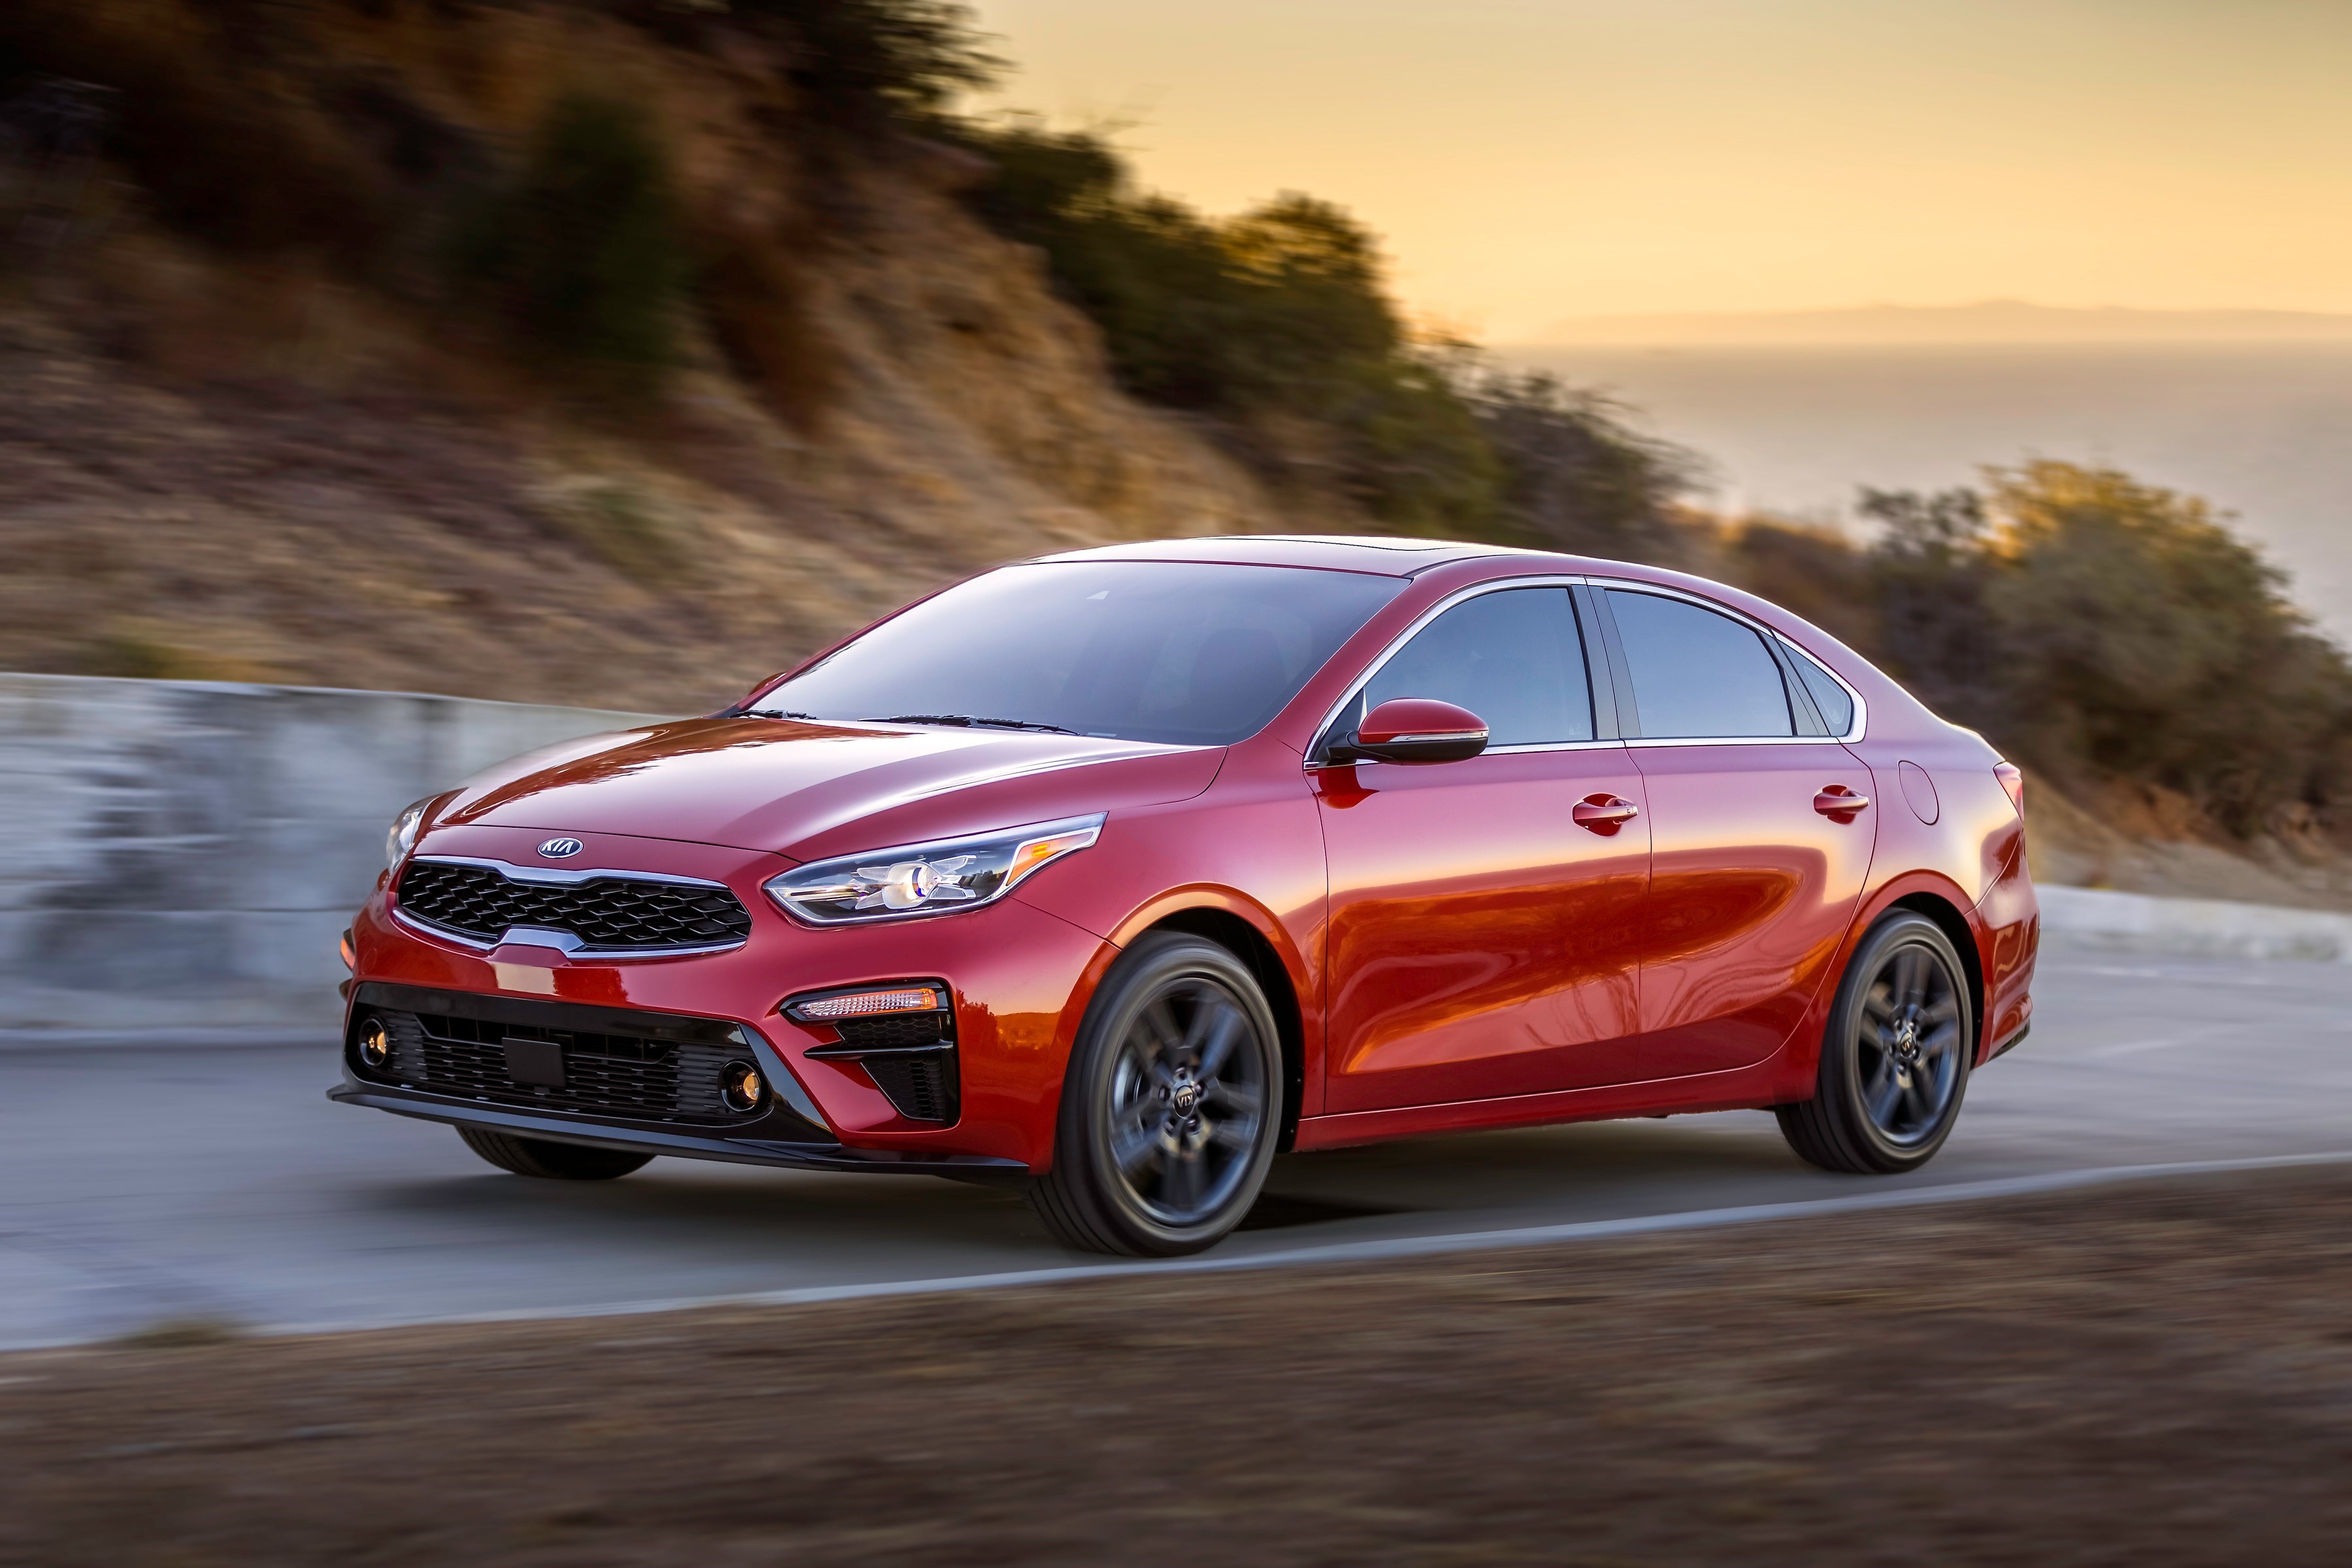 2019 Kia Forte Review: Remarkable Value in a Stylish Package - The Fast